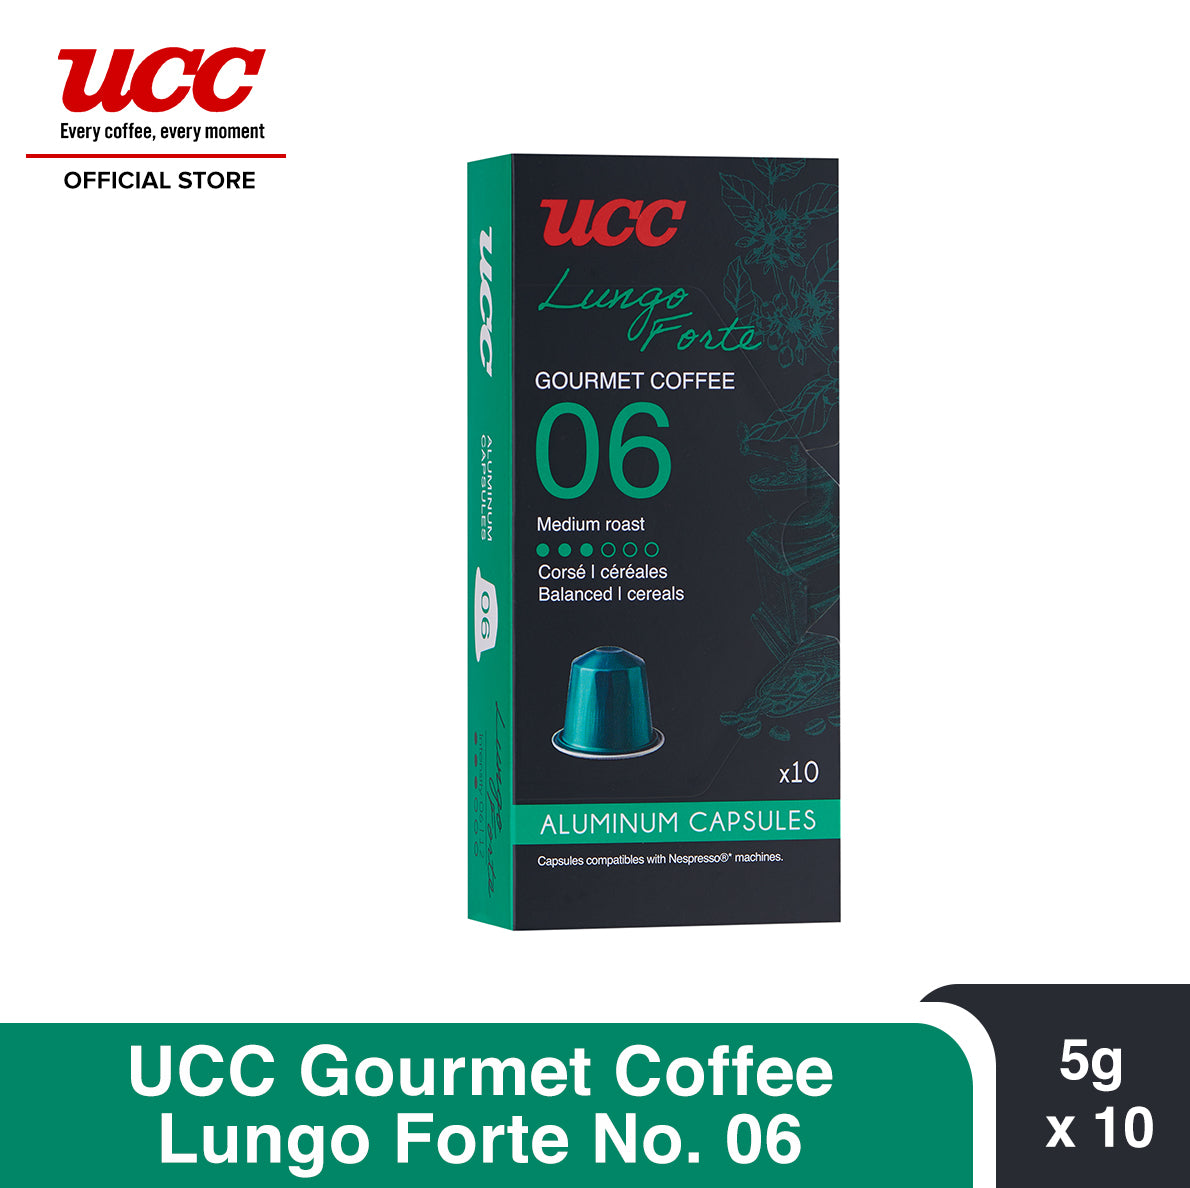 UCC Gourmet Coffee Capsule Lungo Forte No. 06 Compatible with Nespresso